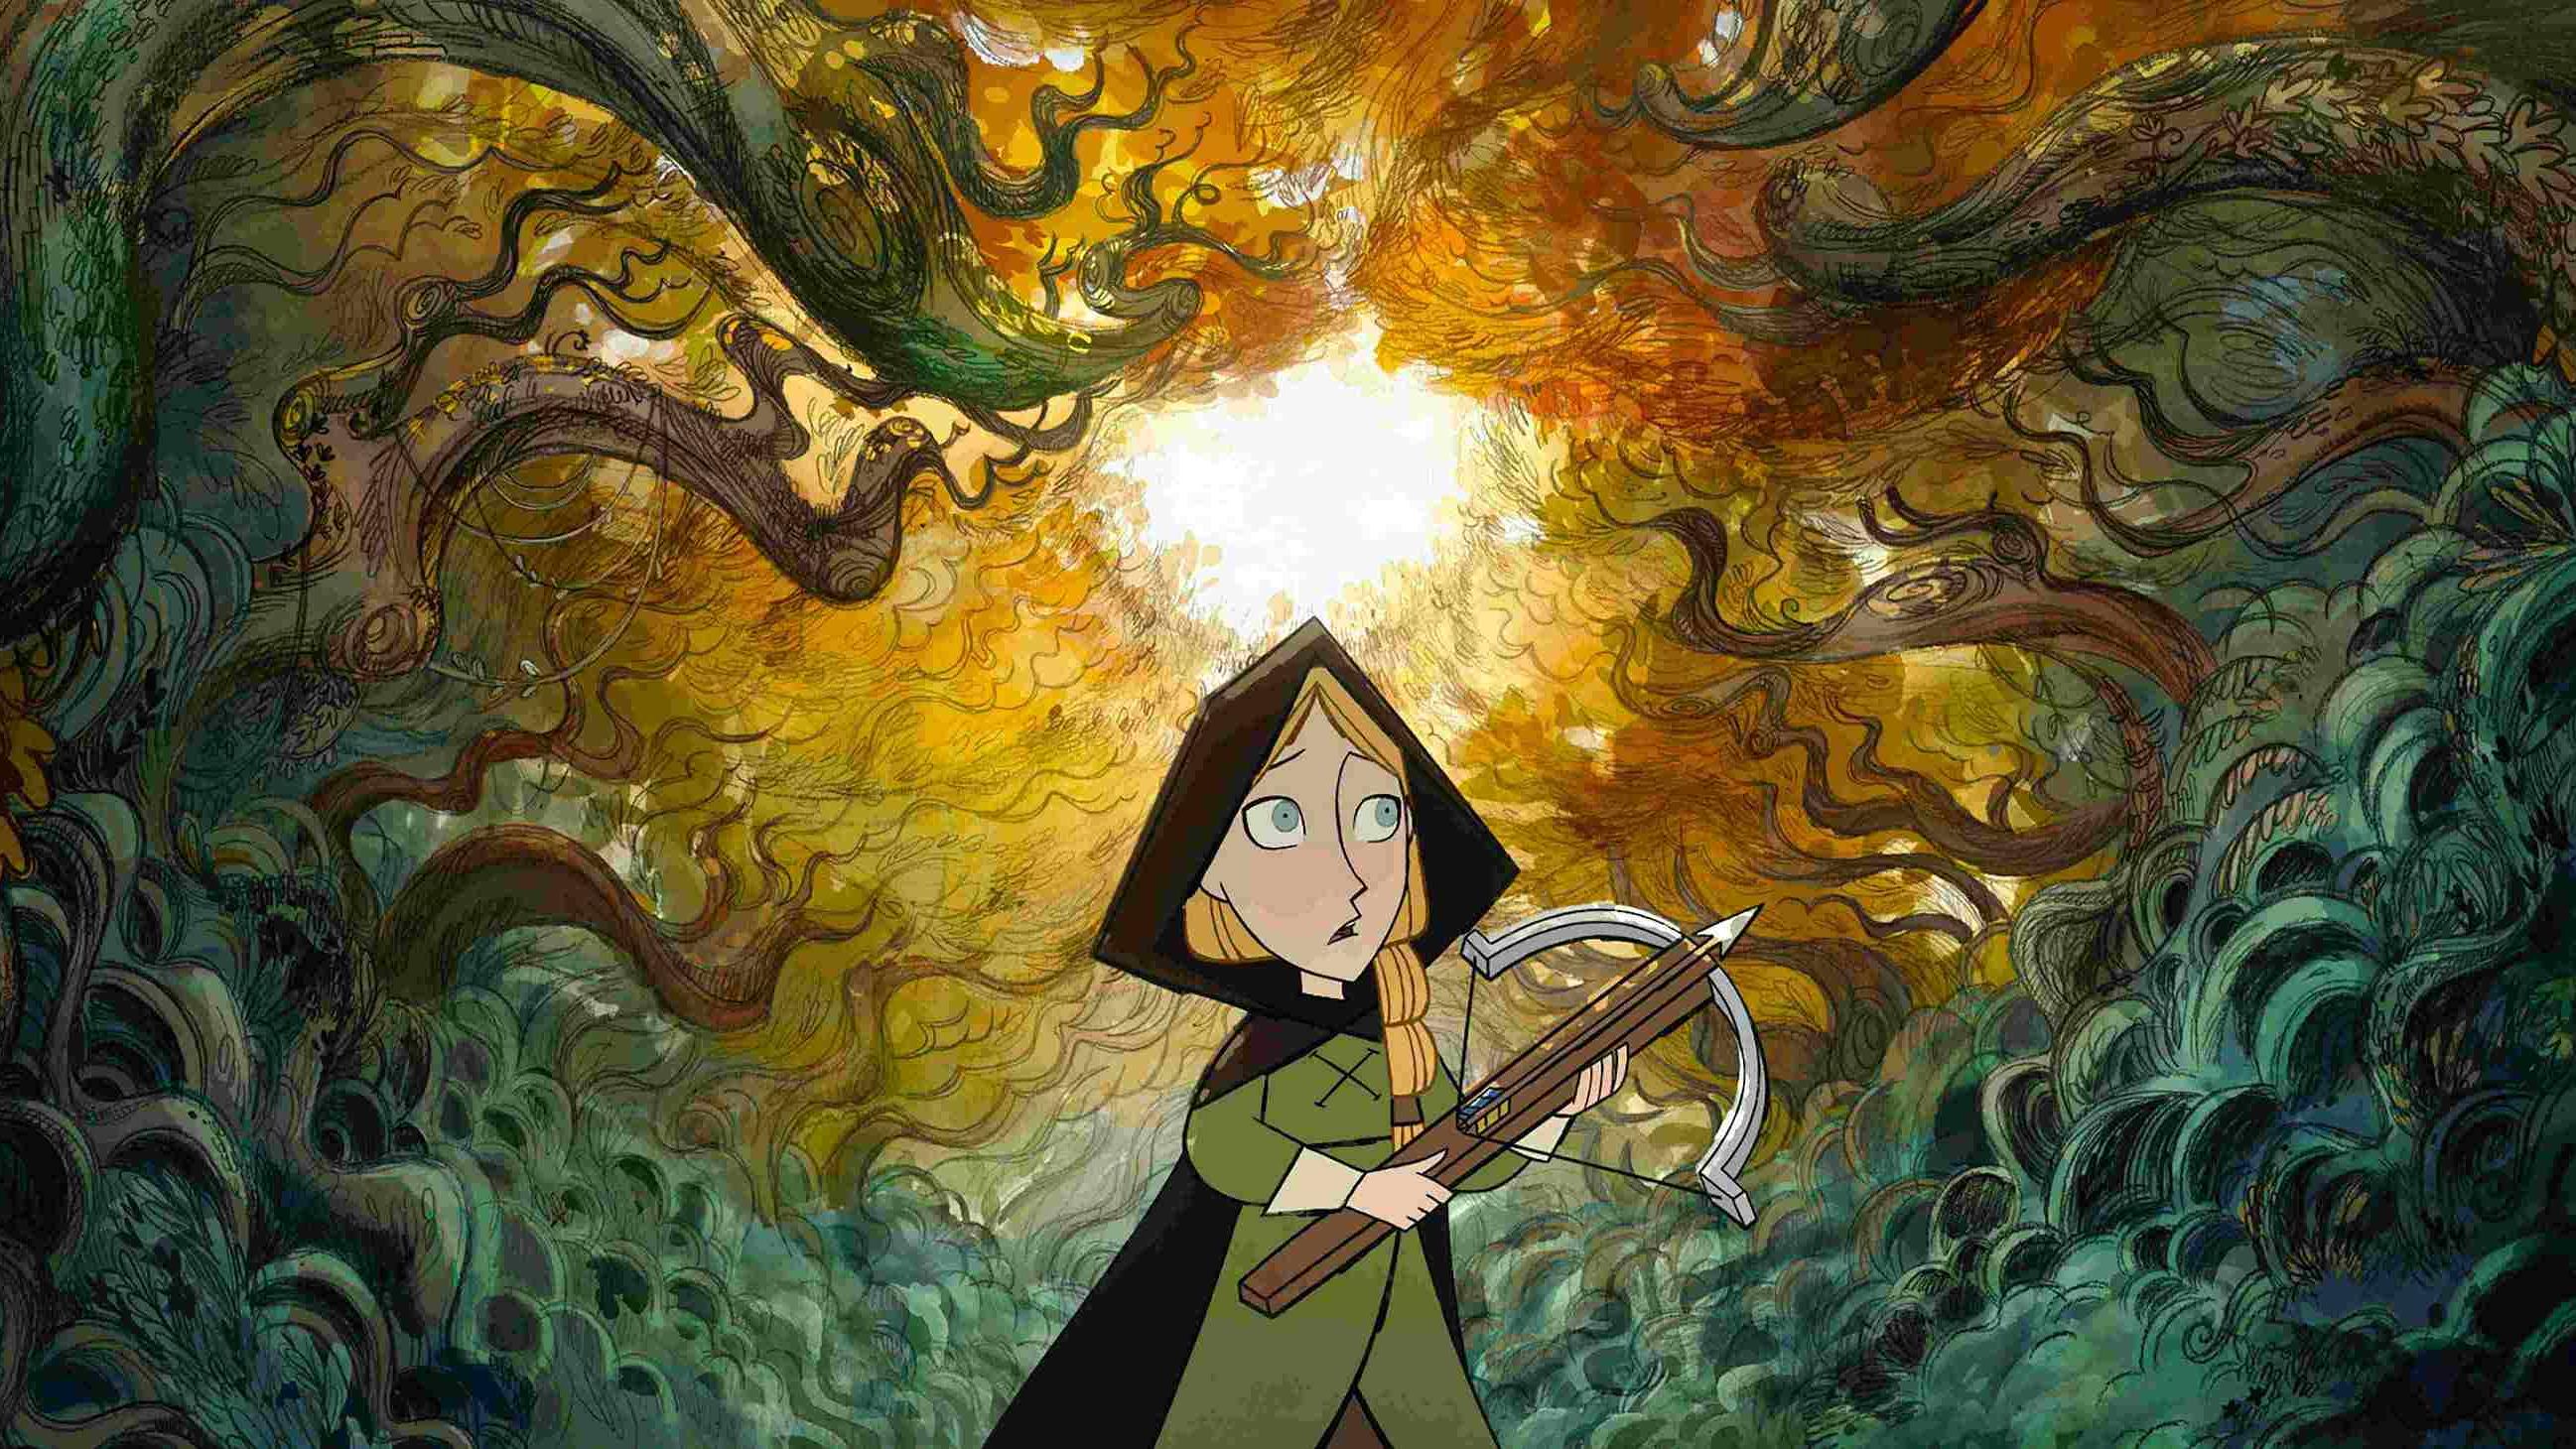 Animated image of a young girl wearing a cape and holding a crossbow in a forest.